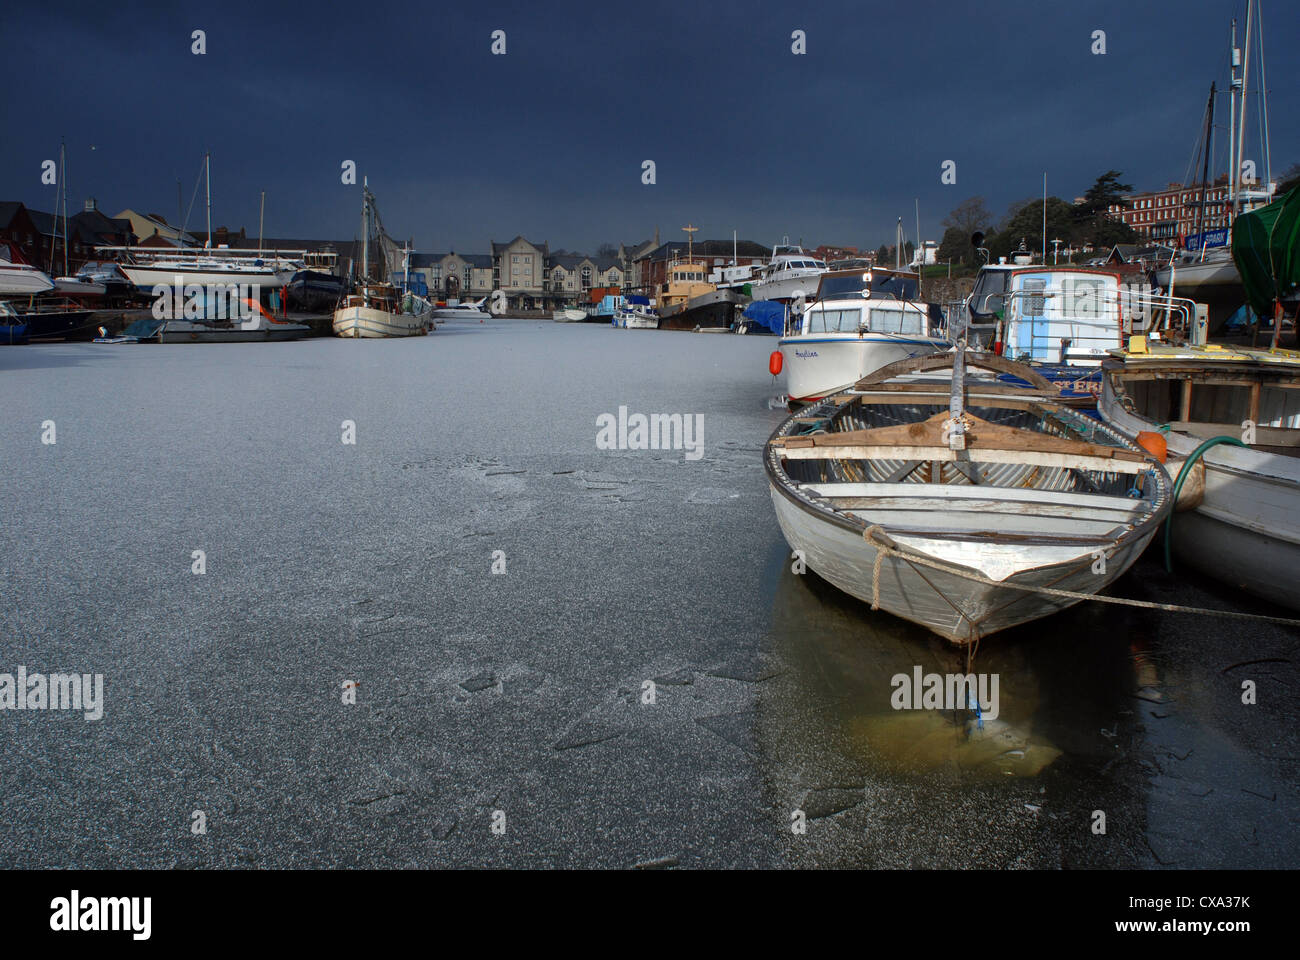 Boats trapped in ice as the Exeter canal basin is covered in a layer of ice. Stock Photo